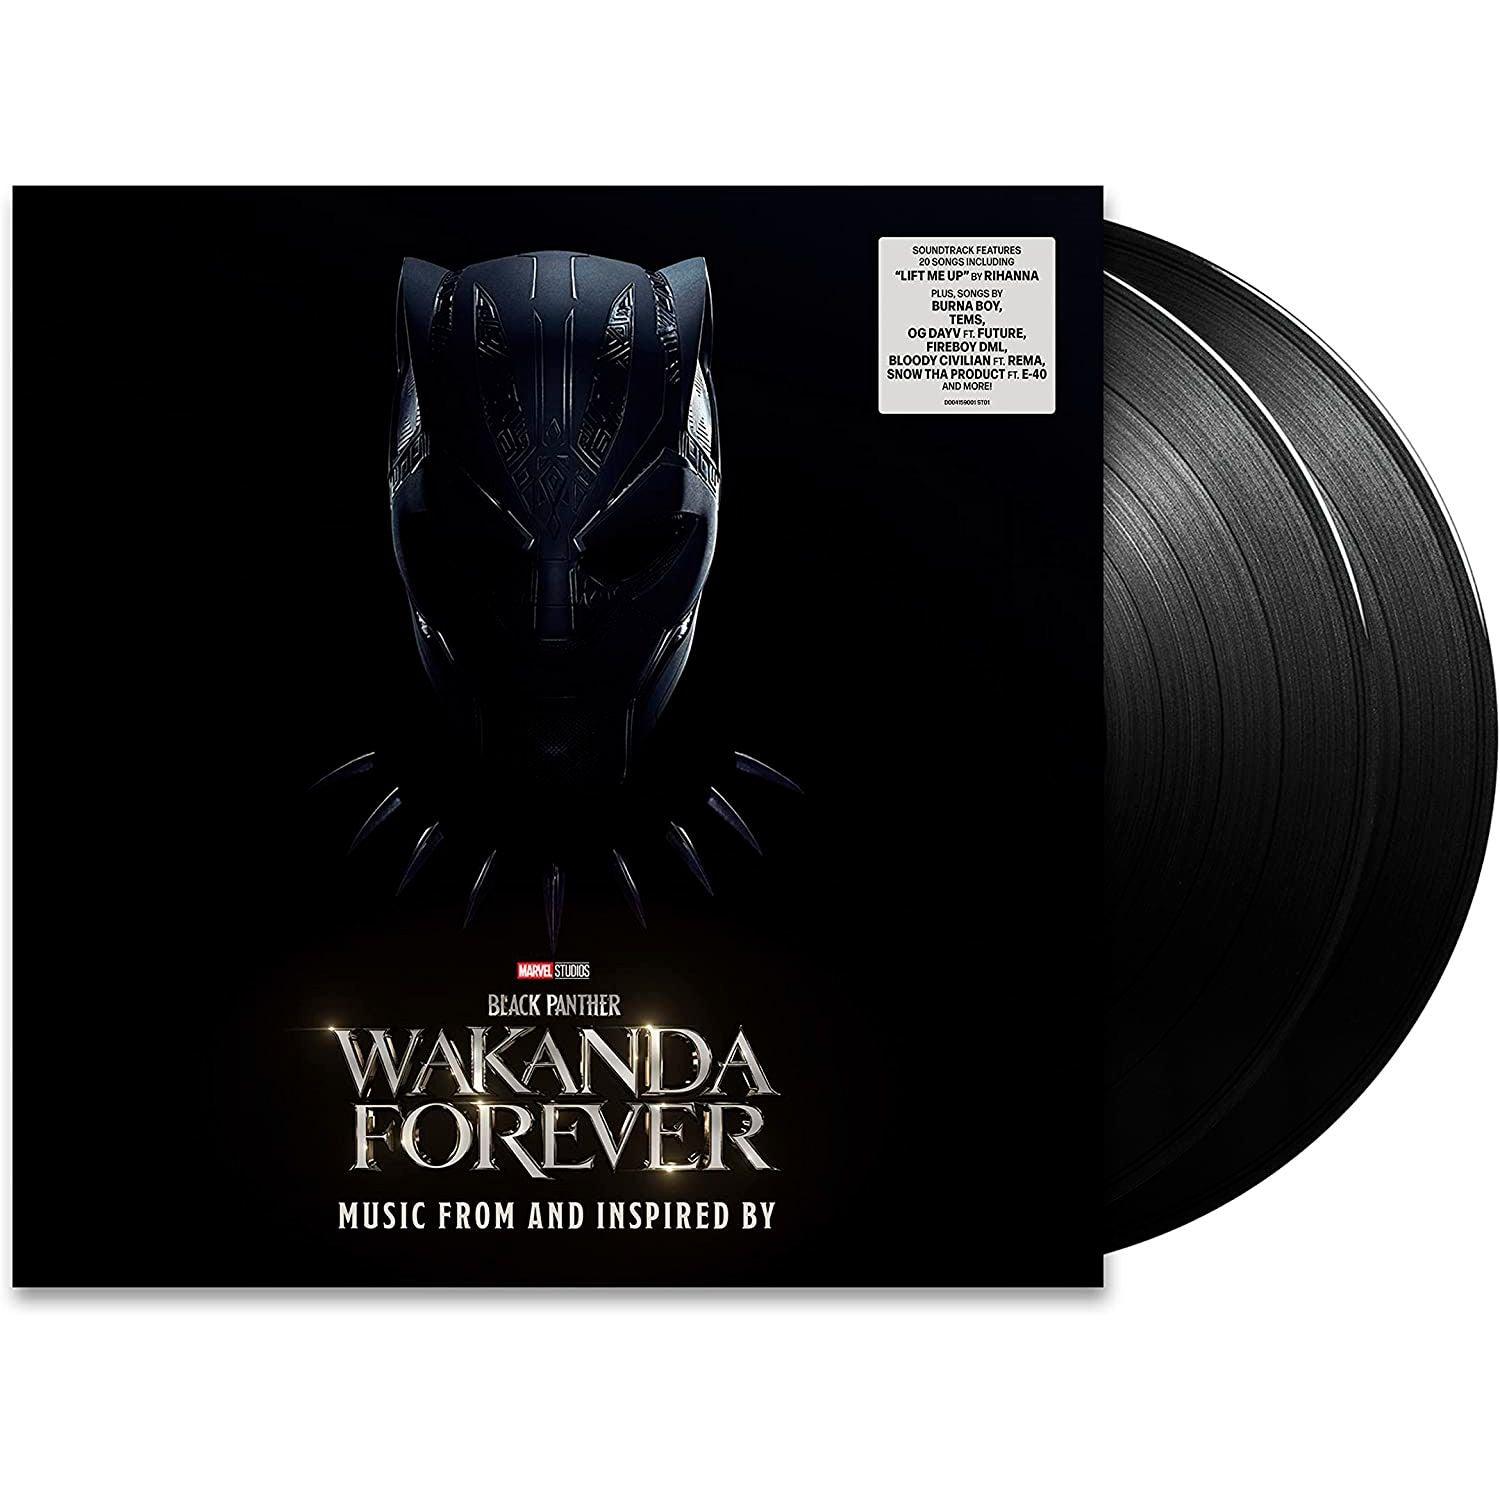 Black Panther: Wakanda Forever (Music From And Inspired By) (Vinyl 2 LP)